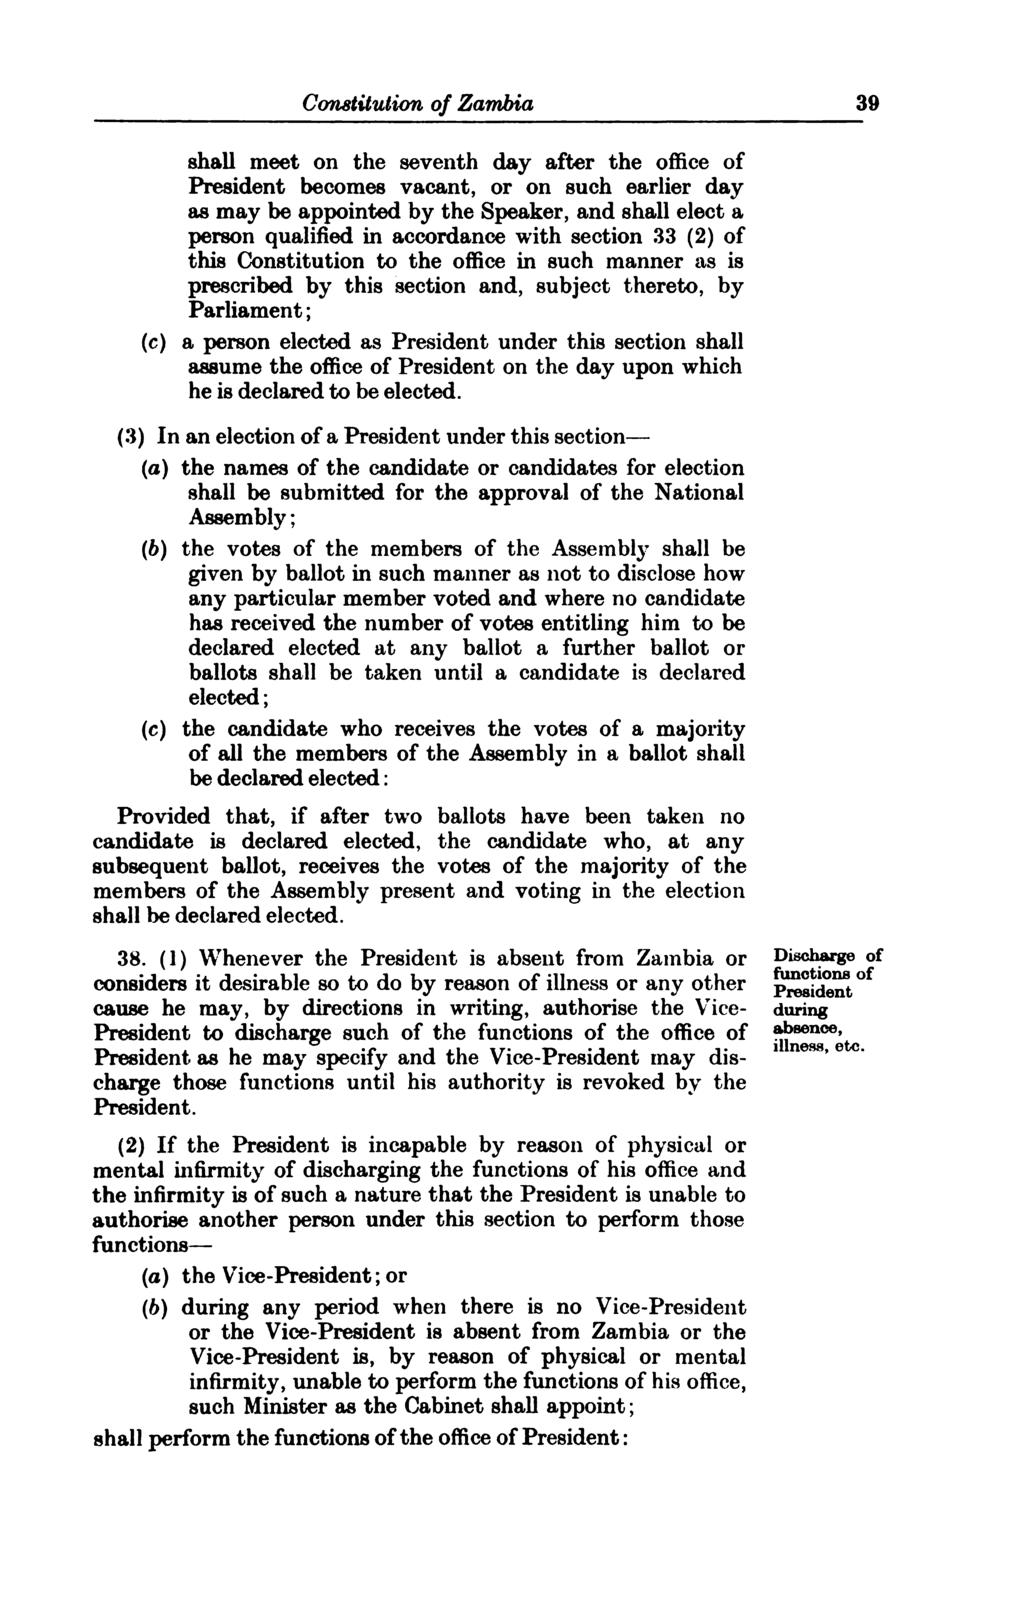 Constitution of Zambia 39 (0 shall meet on the seventh day after the office of President becomes vacant, or on such earlier day as may be appointed by the Speaker, and shall elect a person qualified